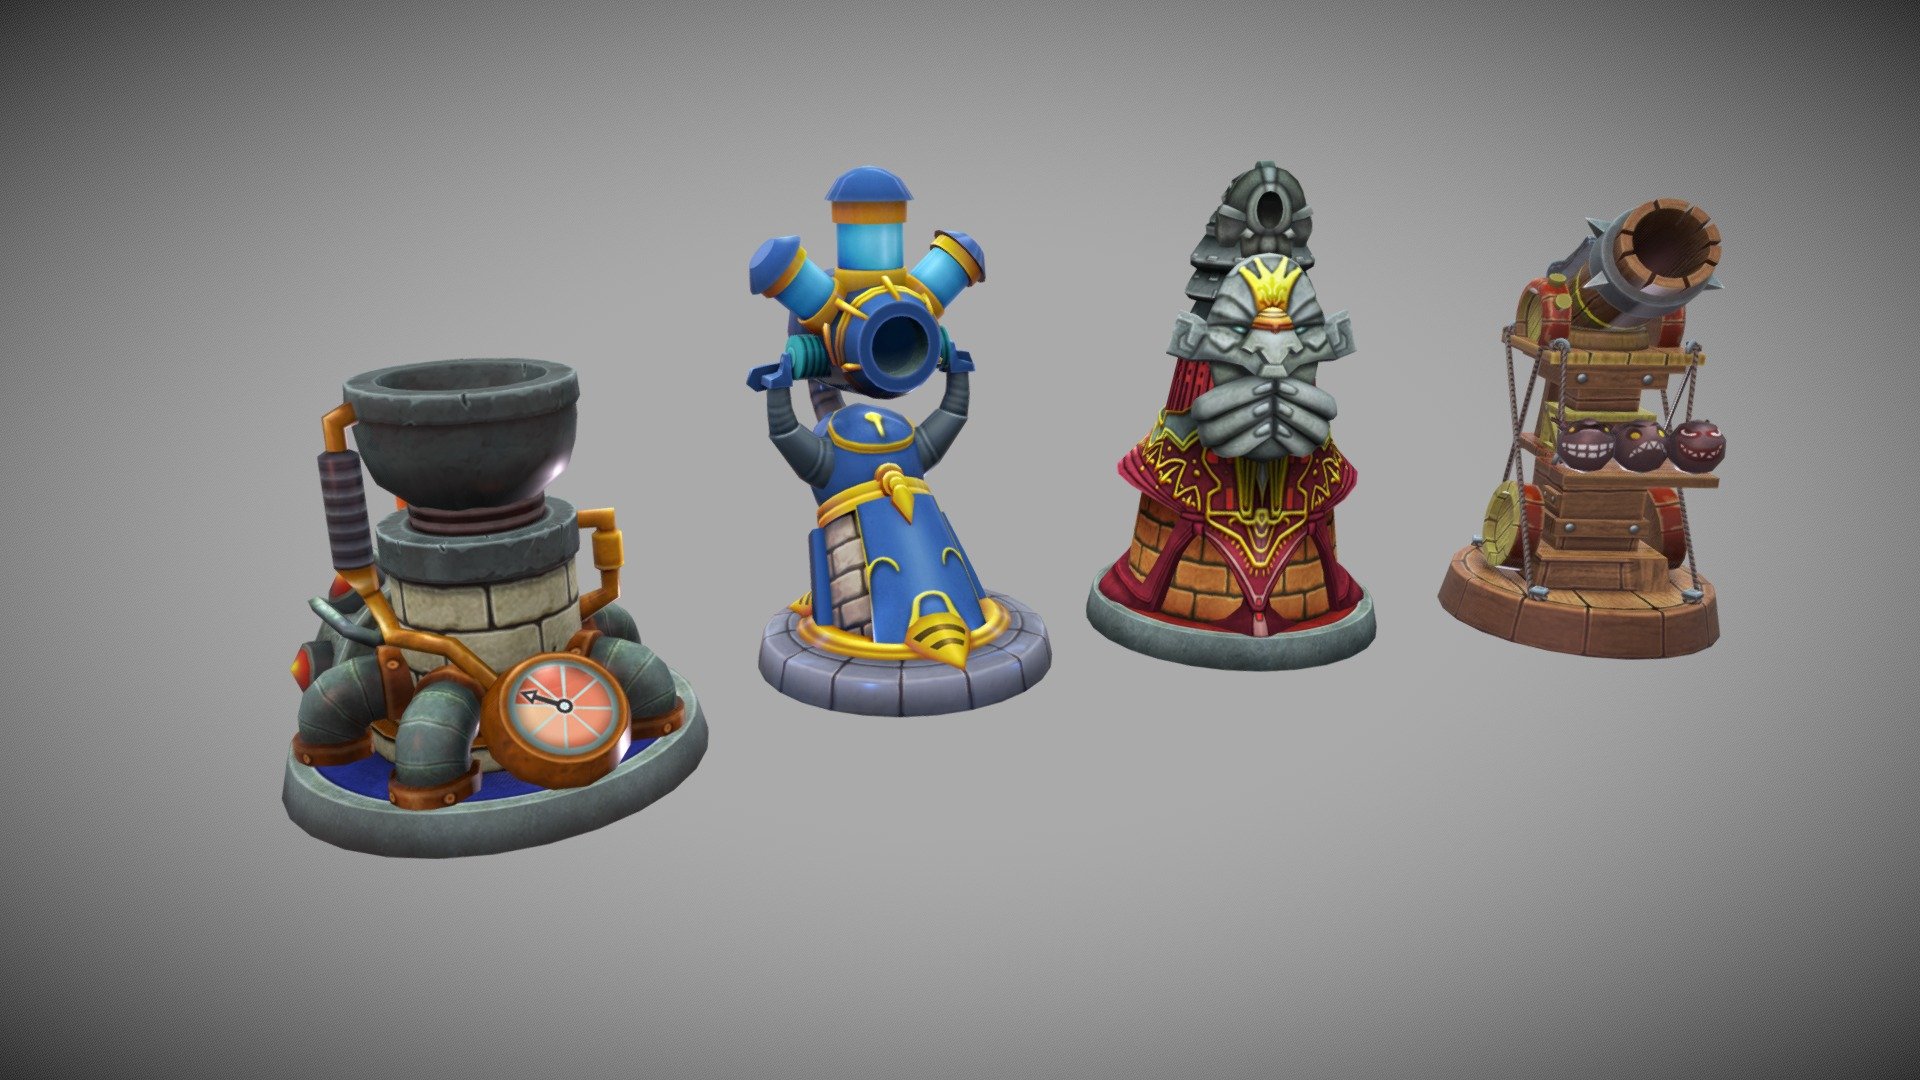 Low-poly models for mobile tower defence game &ldquo;Defenders 2 TD